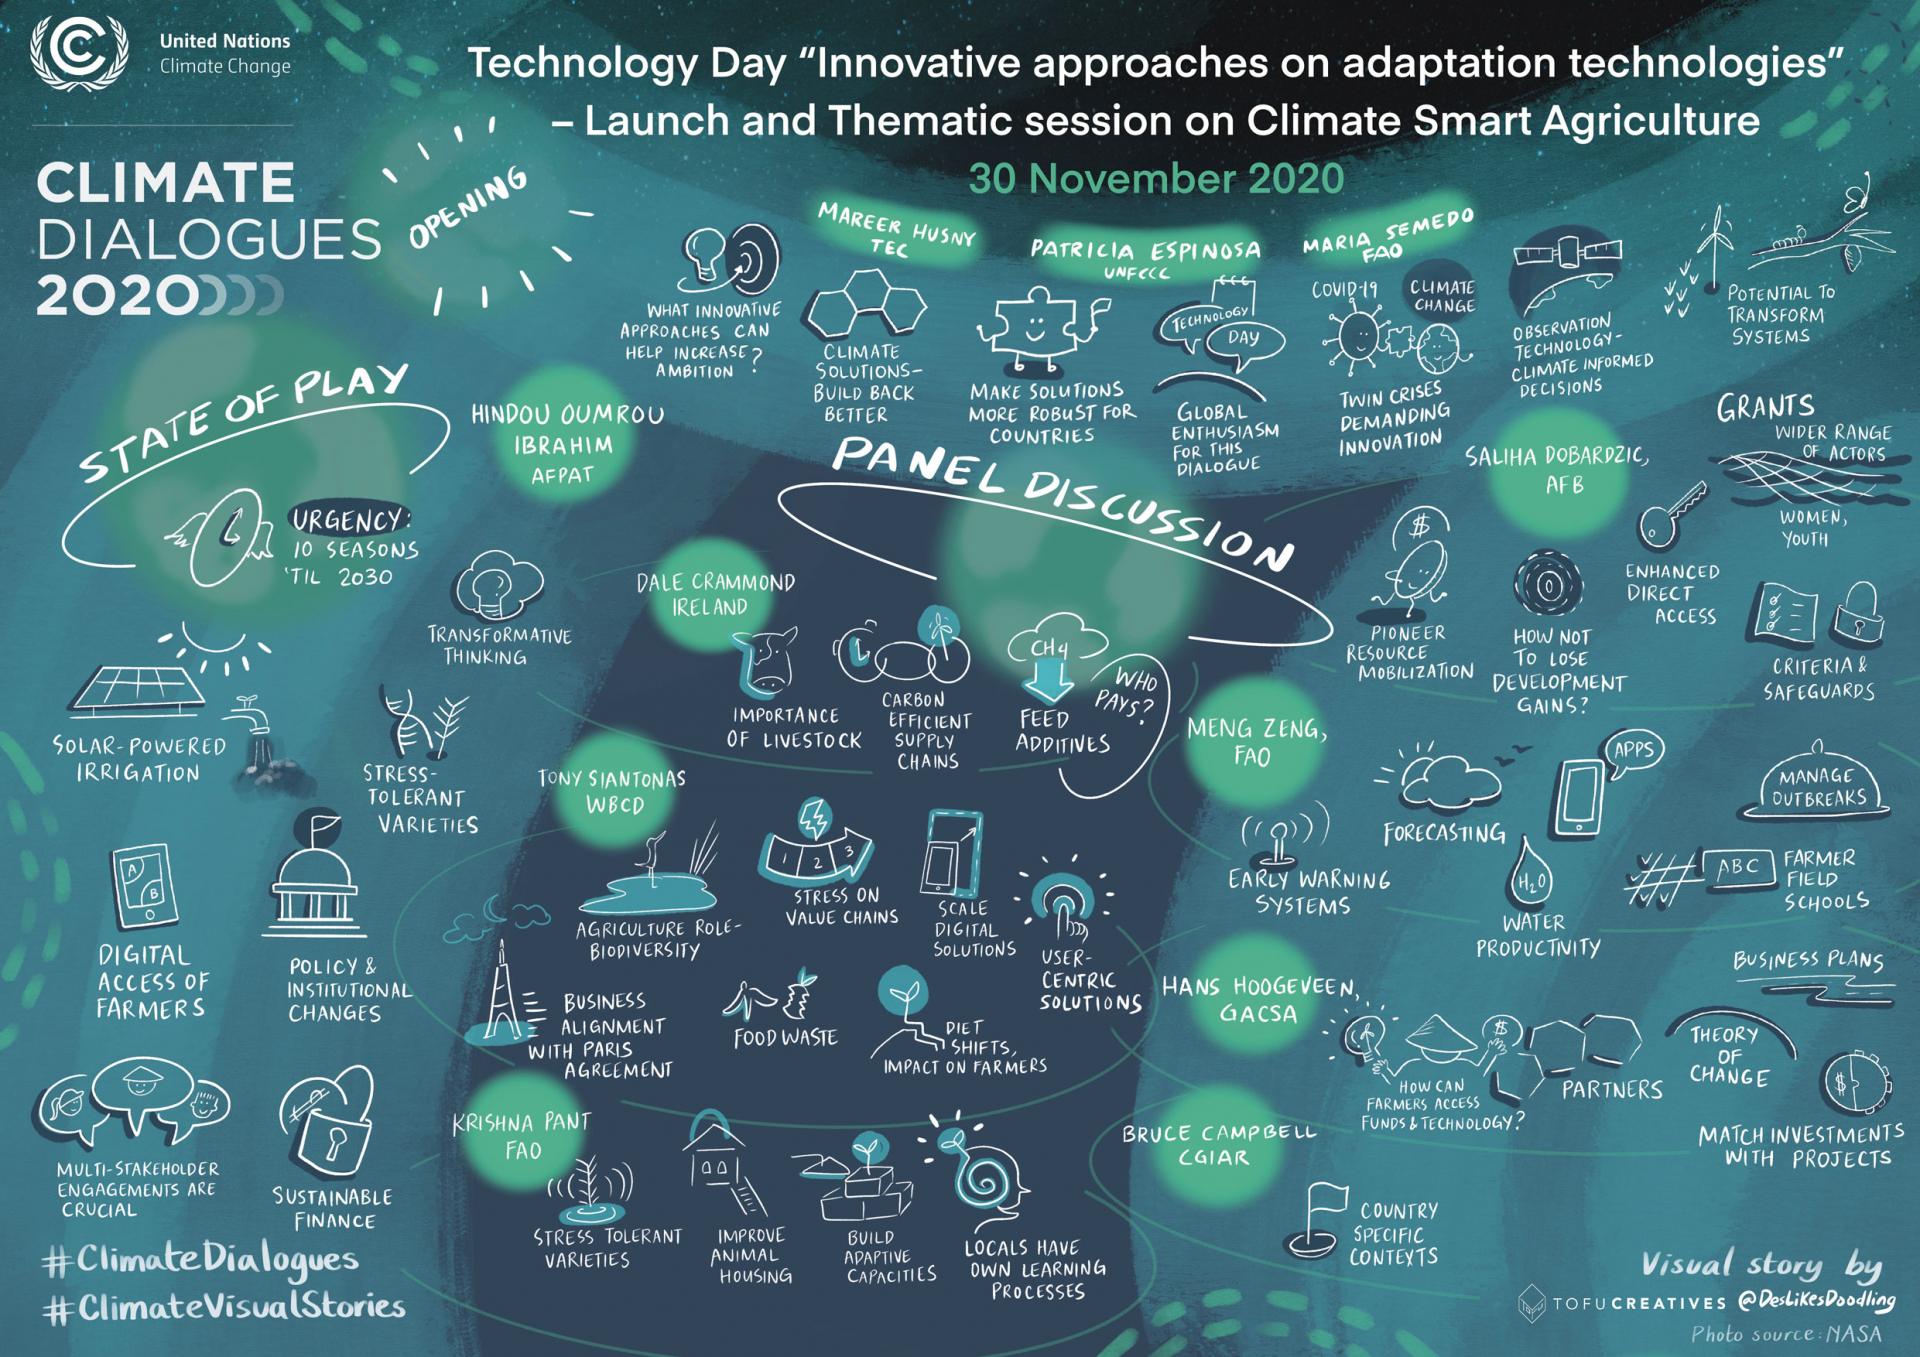 Technology Day “Innovative approaches on adaptation technologies” – Launch and Thematic session on Climate smart agriculture